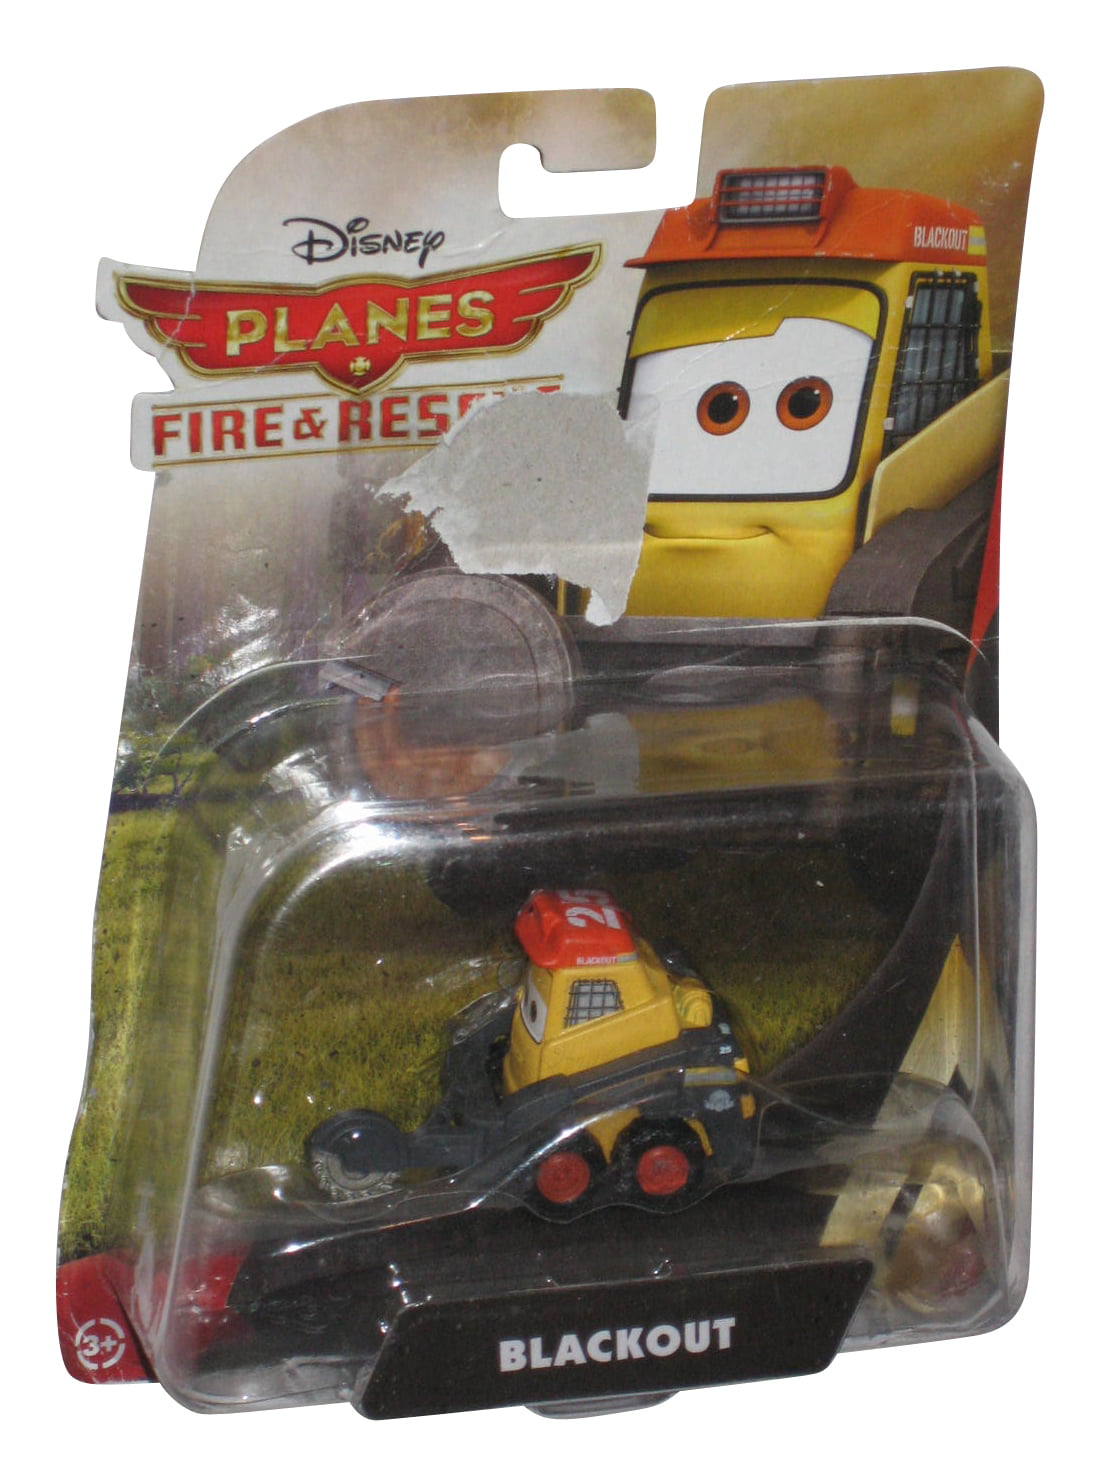 BLACKOUT new DISNEY planes FIRE and RESCUE die-cast VEHICLE toy PIXAR cars